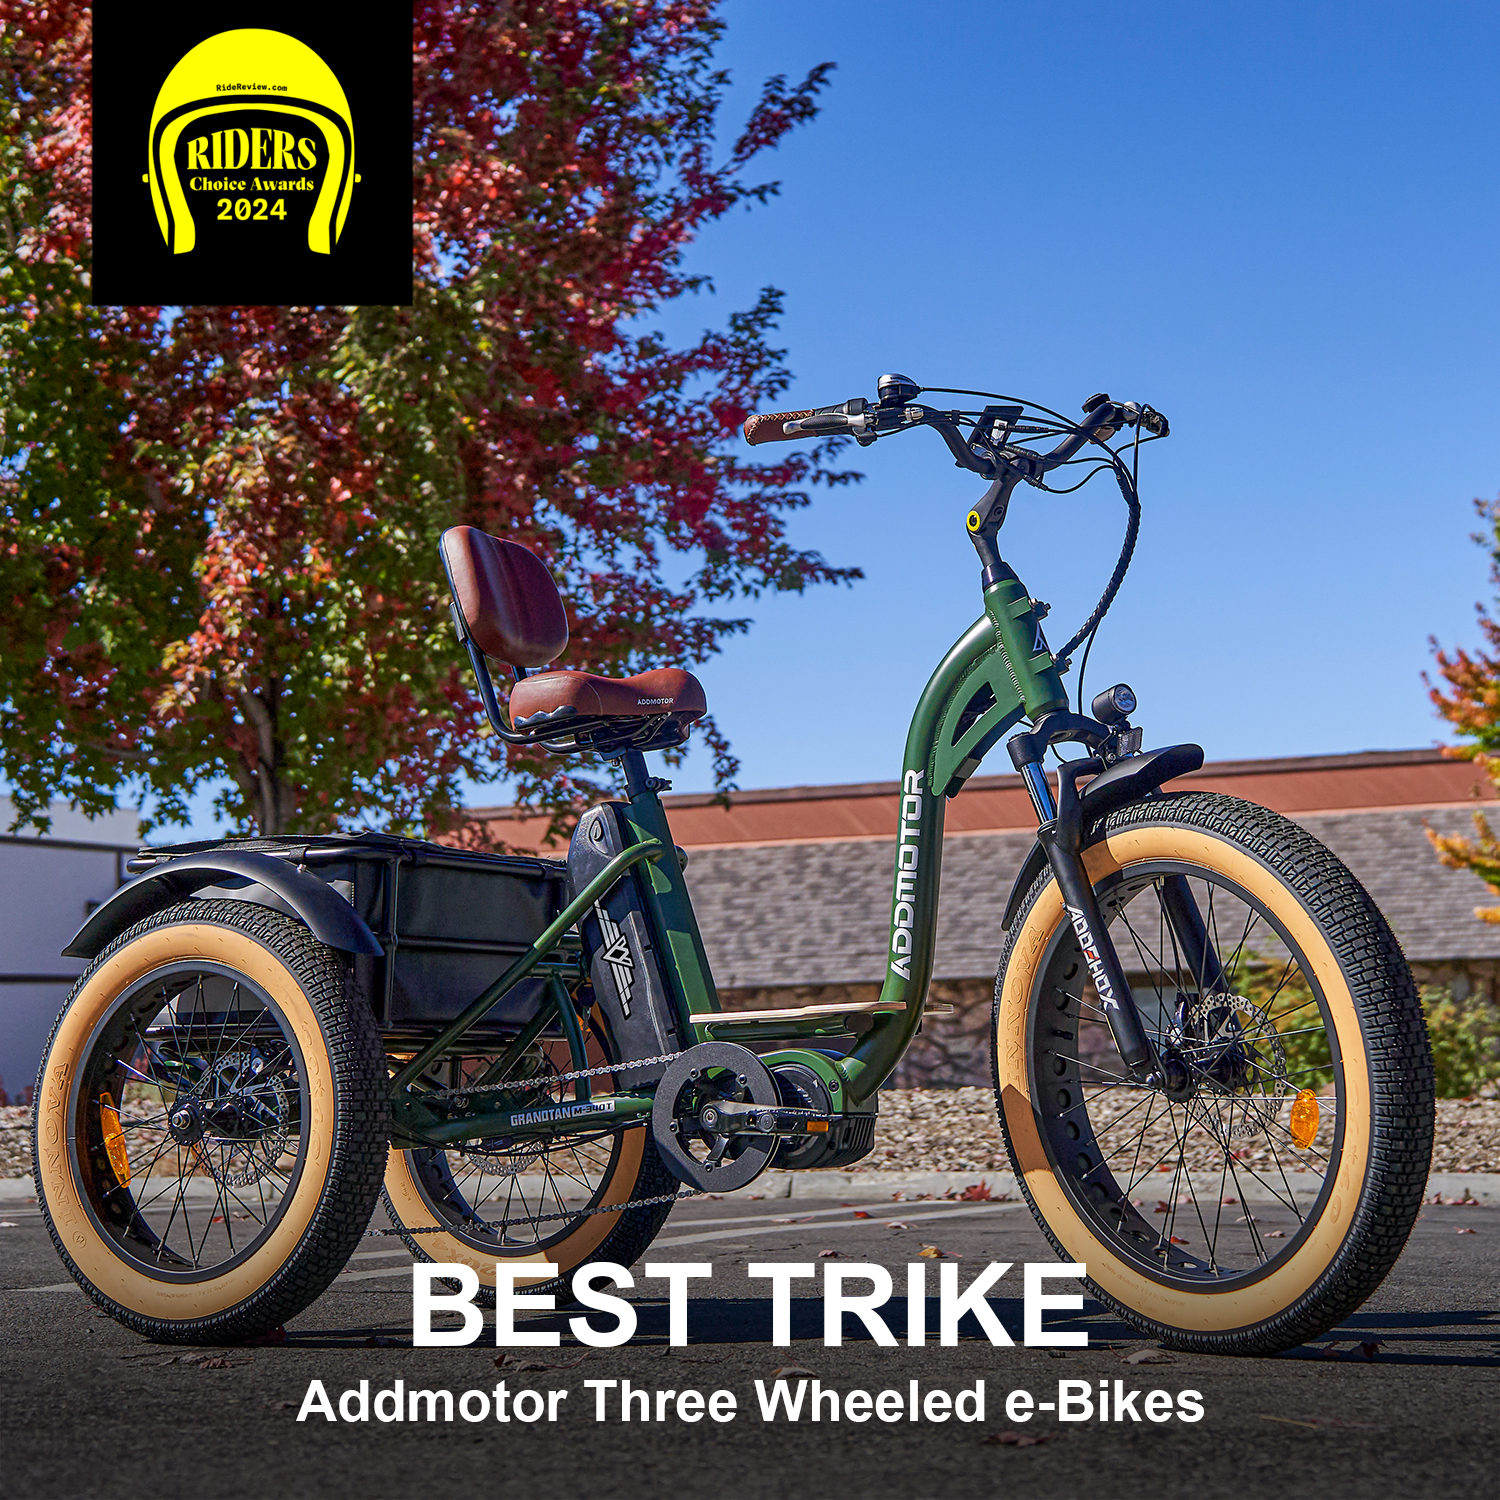 News | Addmotor Wins the Rider's Choice Award for Best Trike 2024!